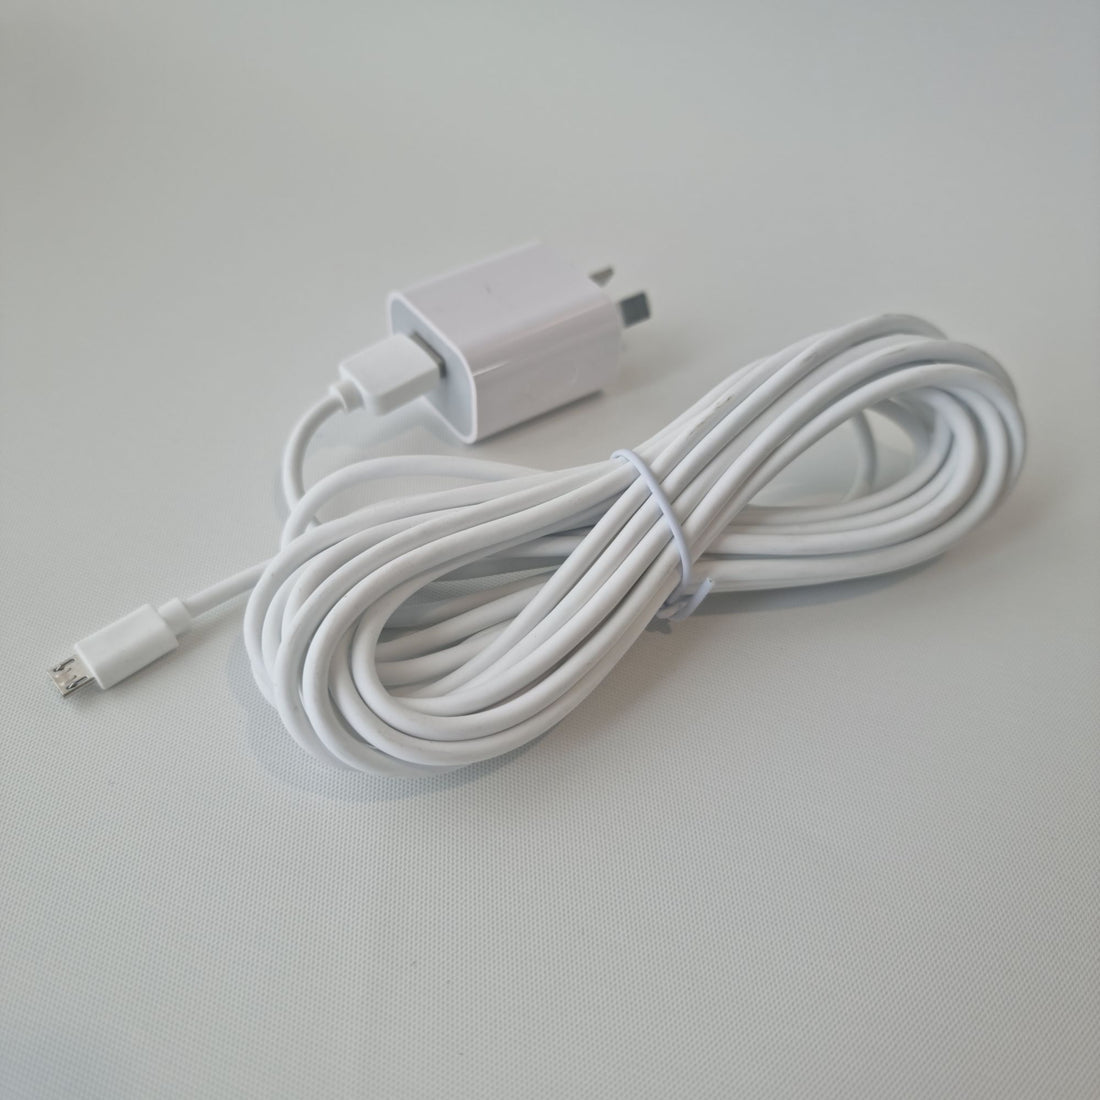 USBC 4m charger for Roller Blinds